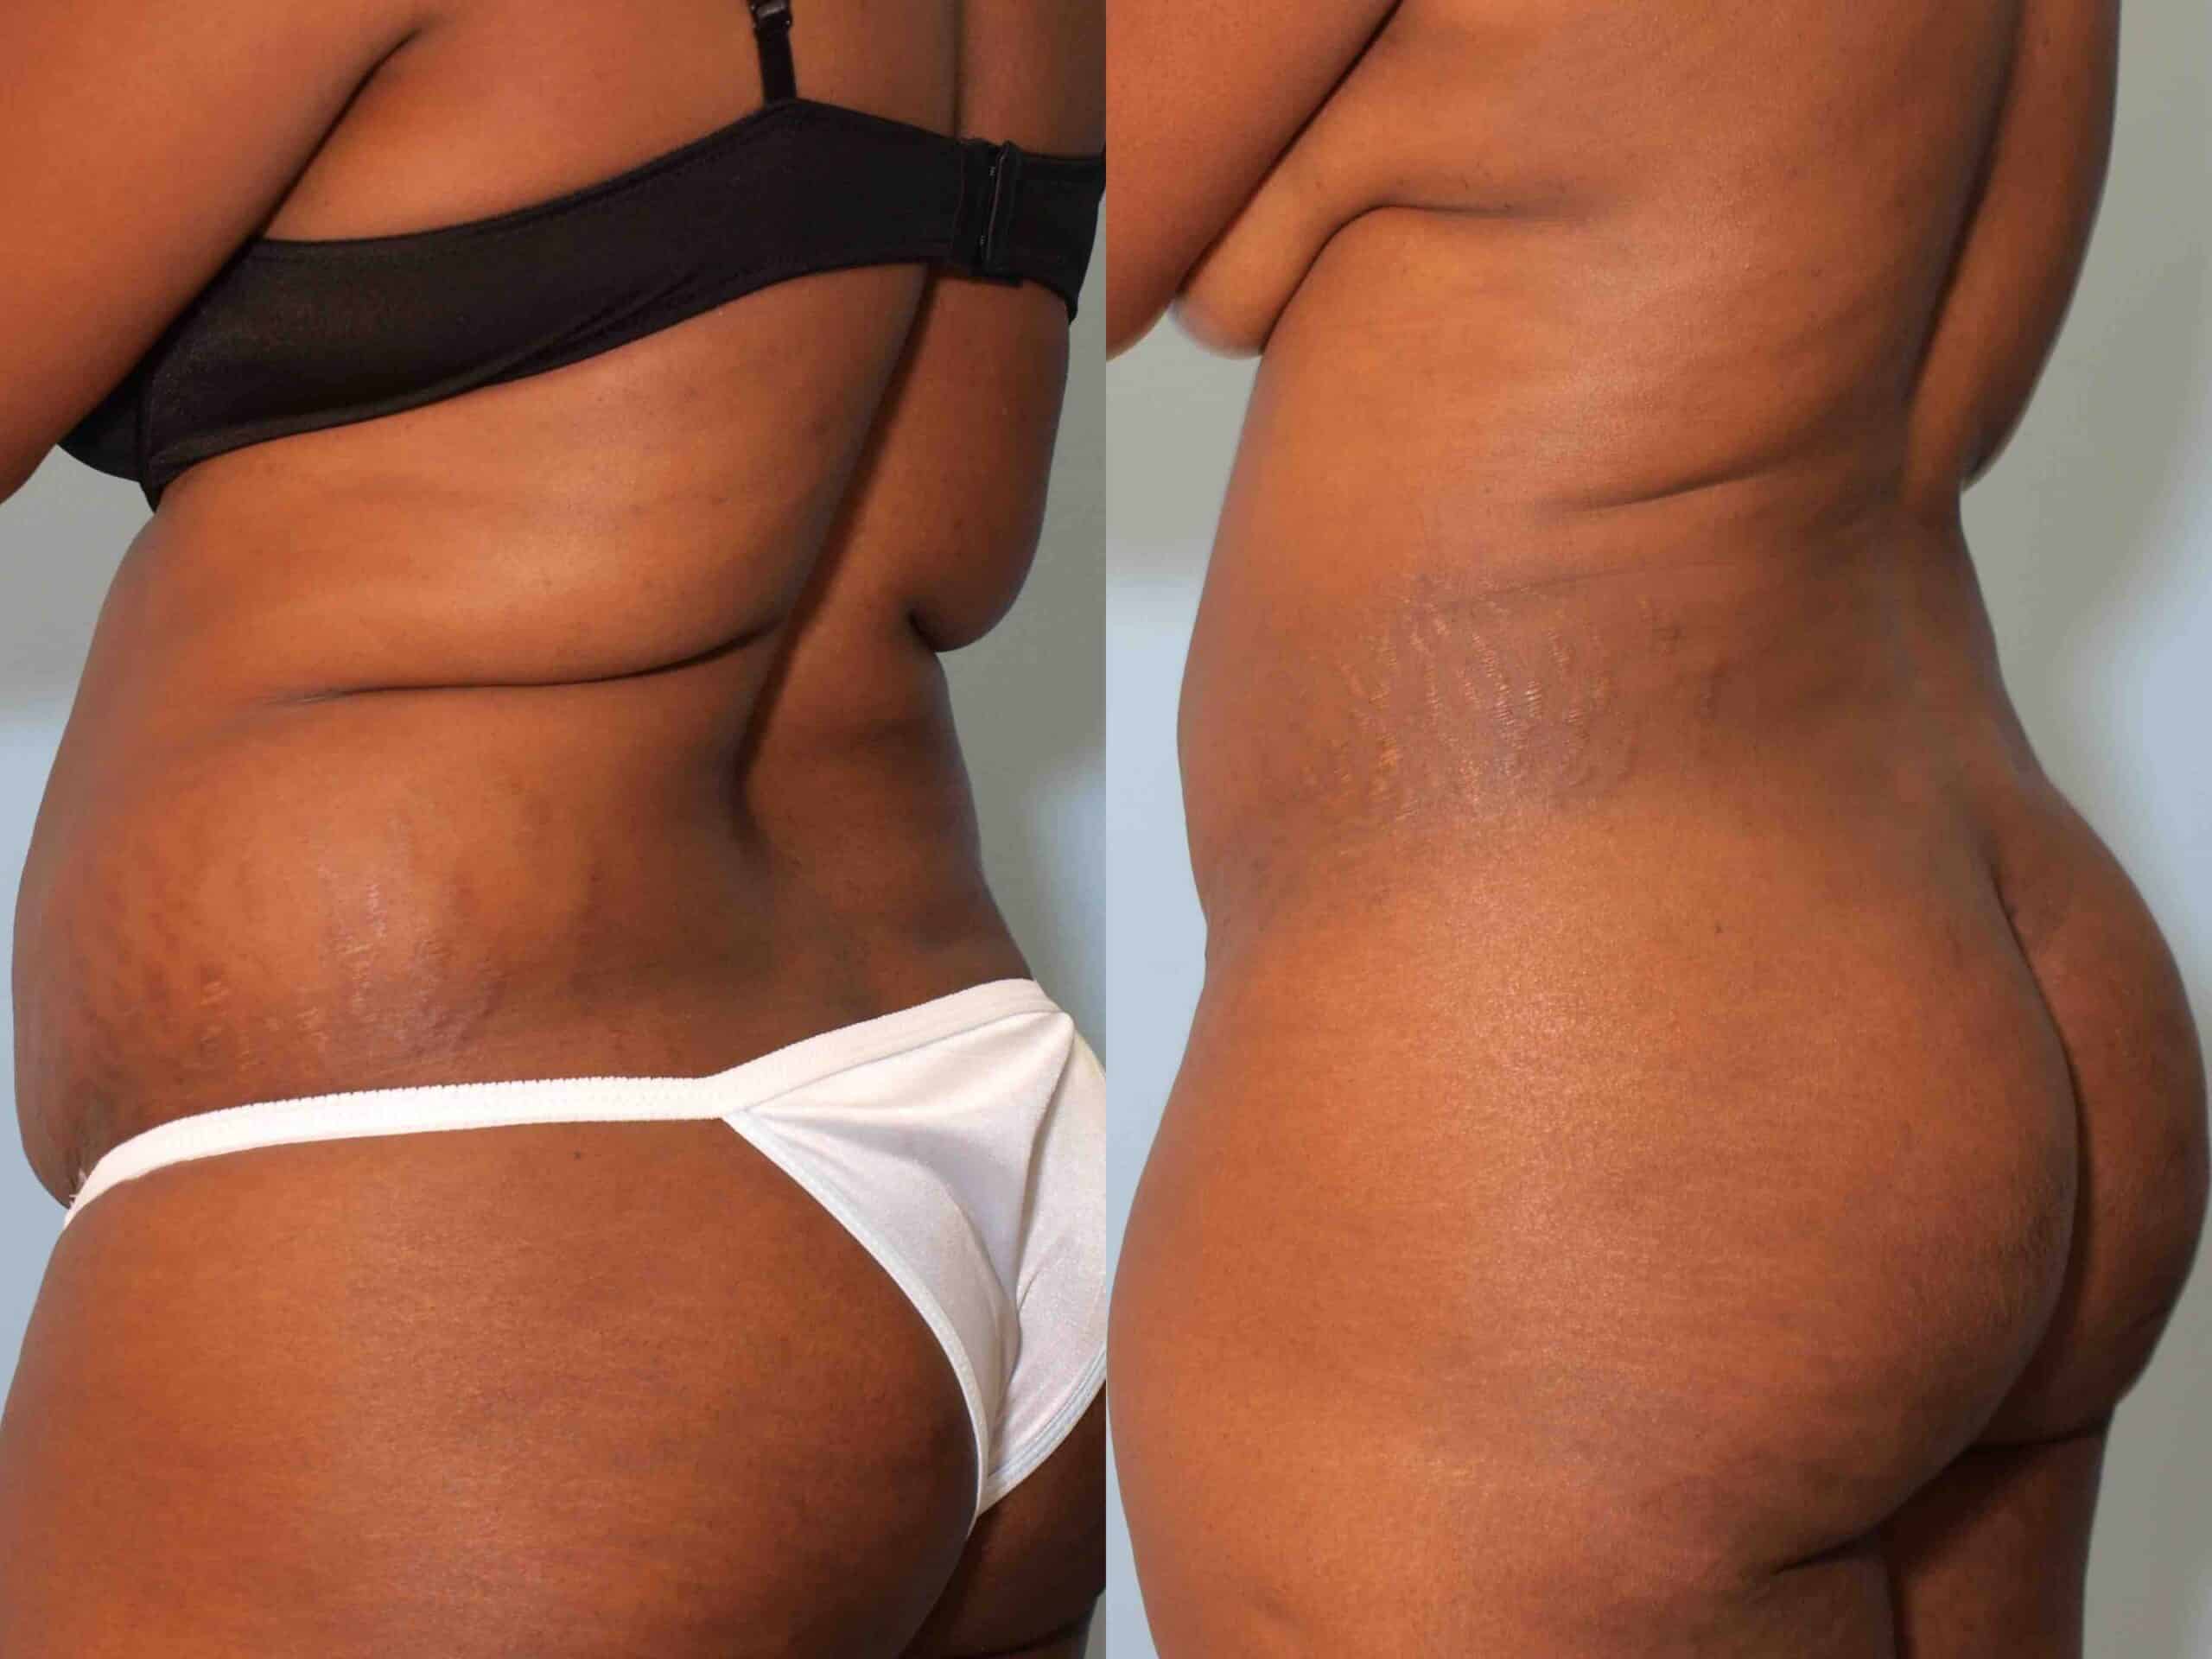 Before and after, patient 2 mo post op from VASER Abdomen, Back, and Flanks procedures performed by Dr. Paul Vanek